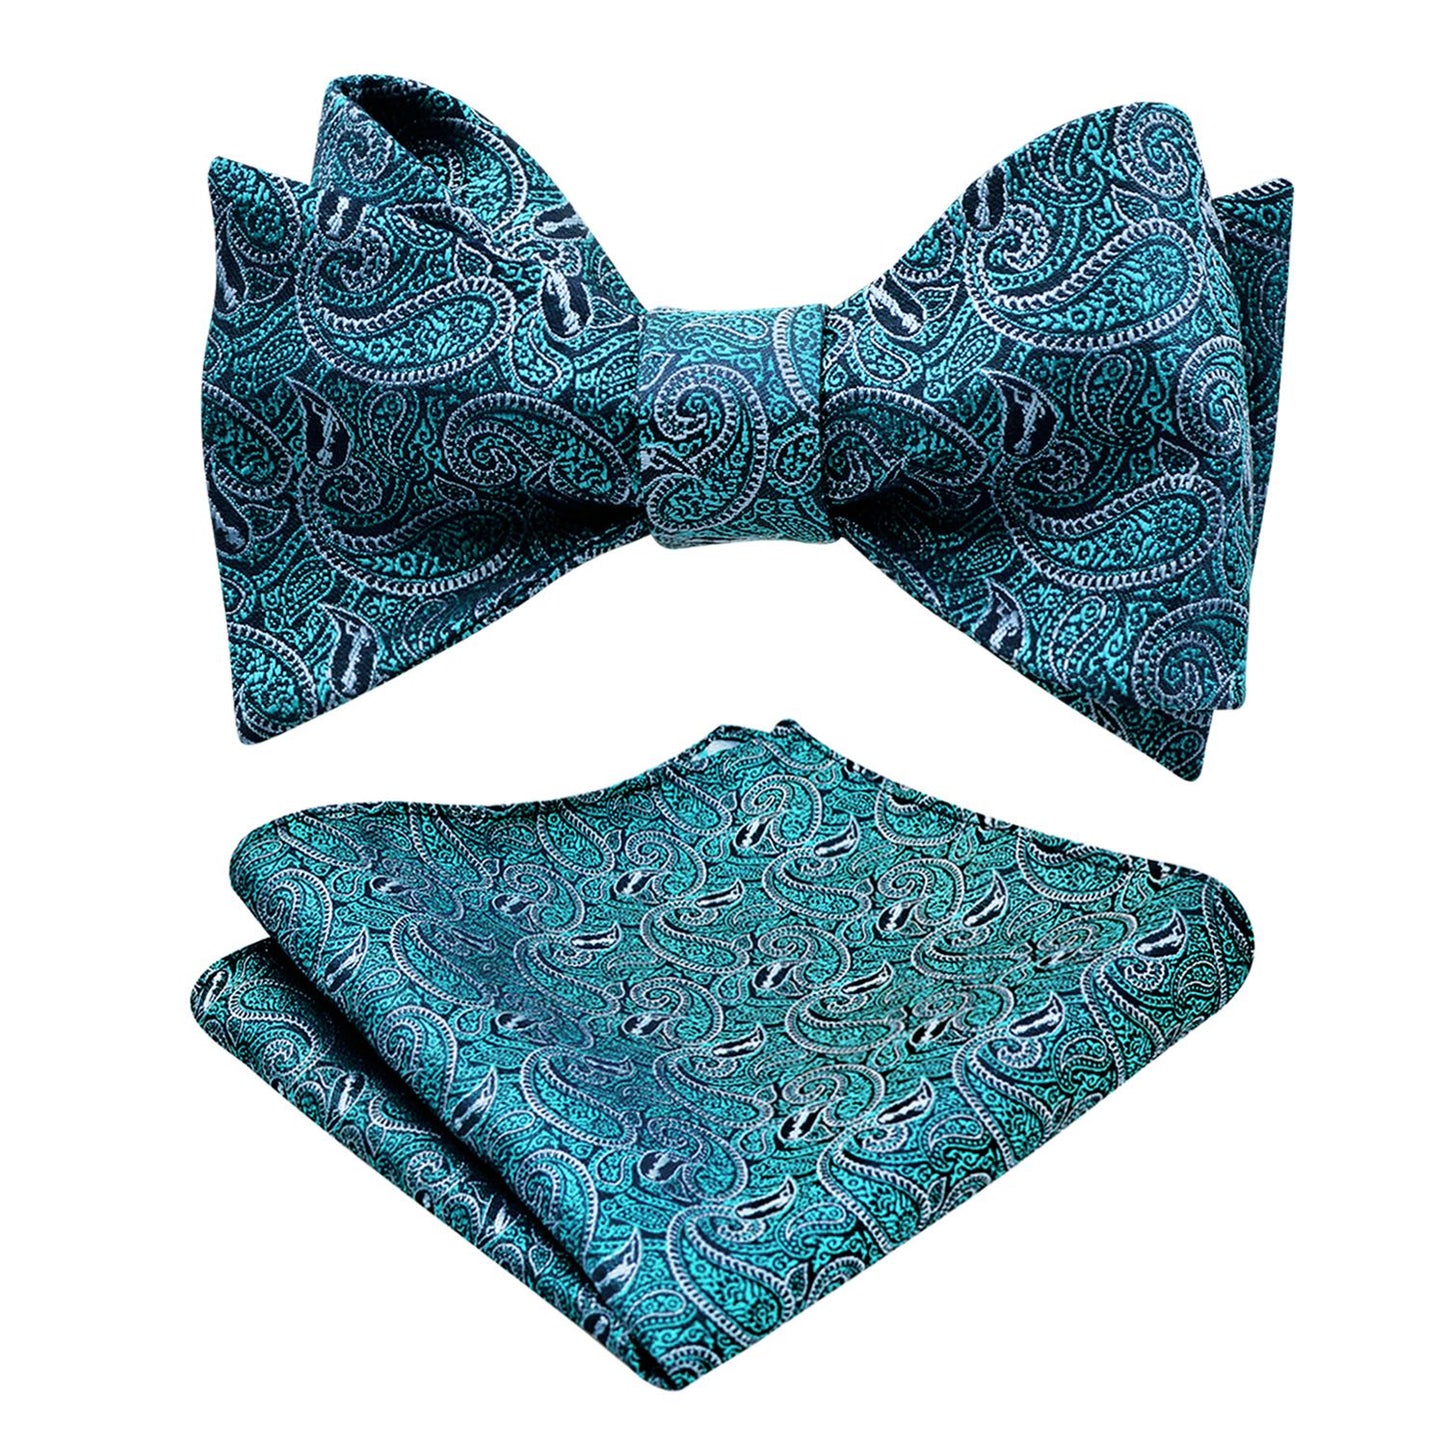 Men's Paisley Jacquard Woven Self Bow Tie with Hanky Set #046